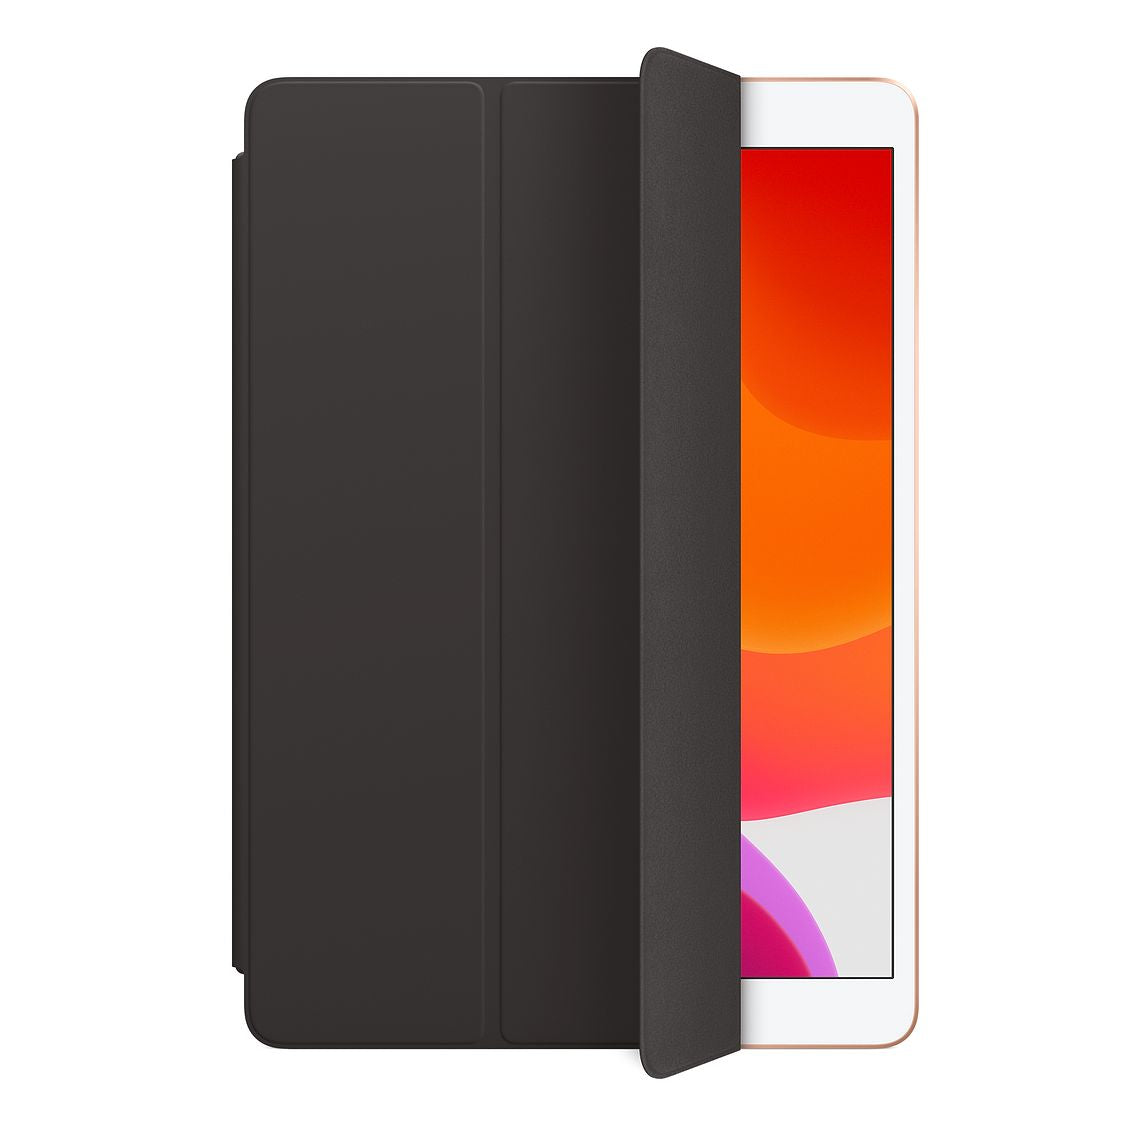 Smart Cover for iPad (7th generation) and iPad Air (3rd generation)